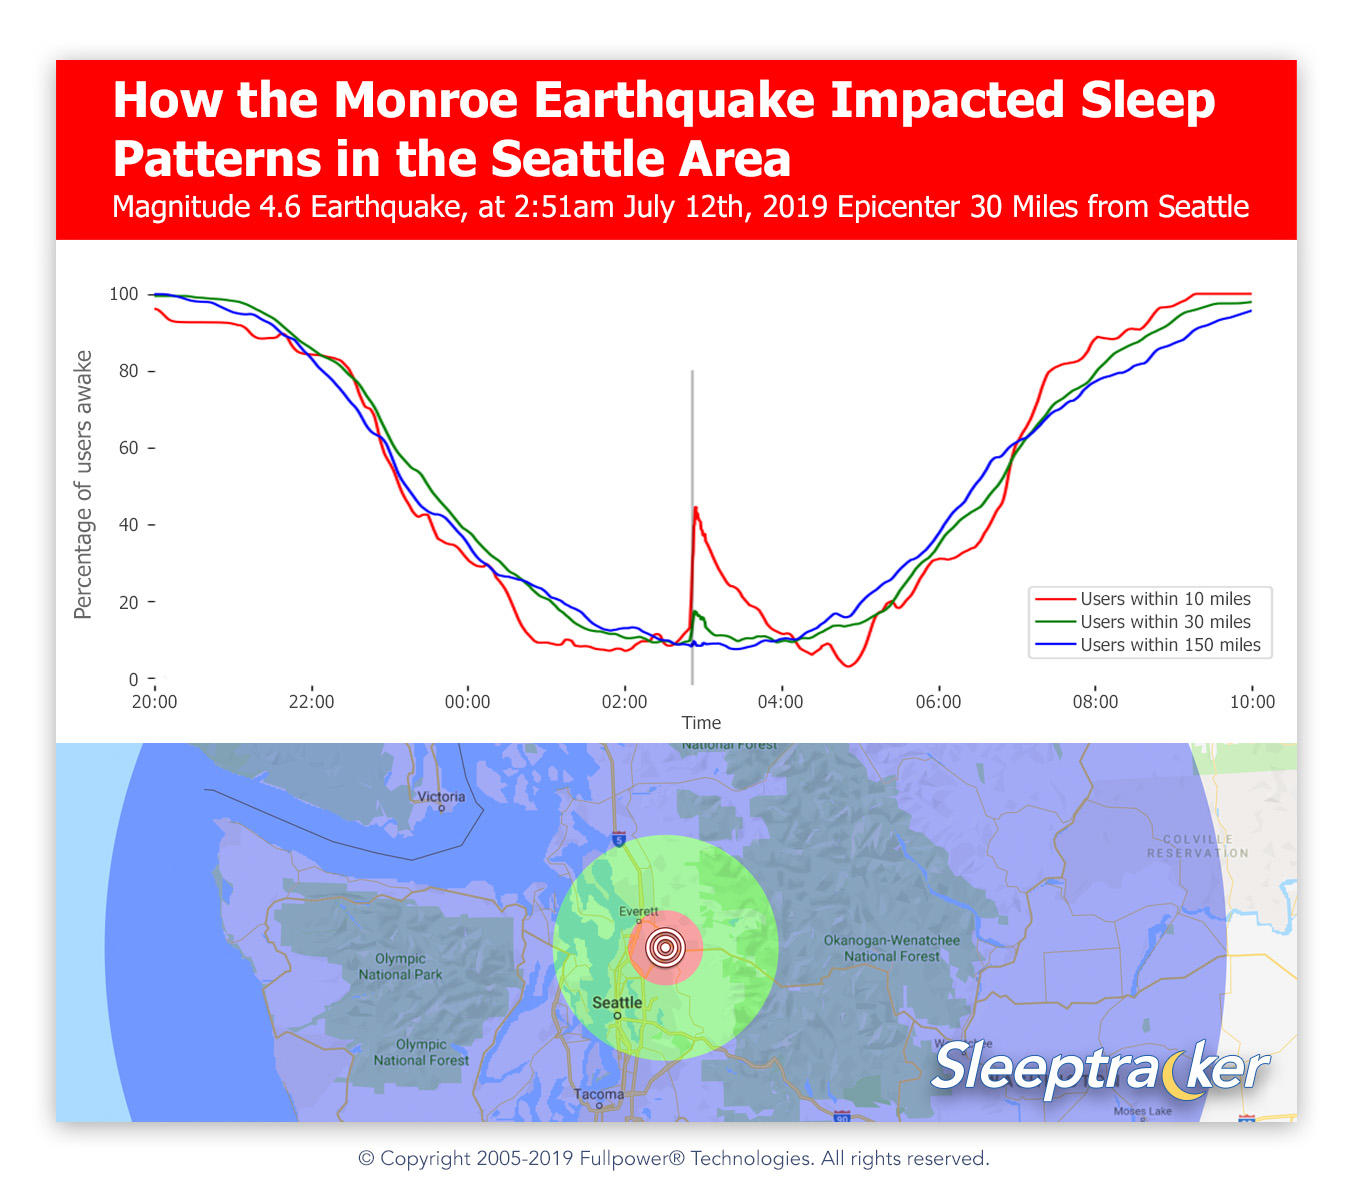 How the Monroe Earthquake Impacted Sleep Patterns in the Seattle Area